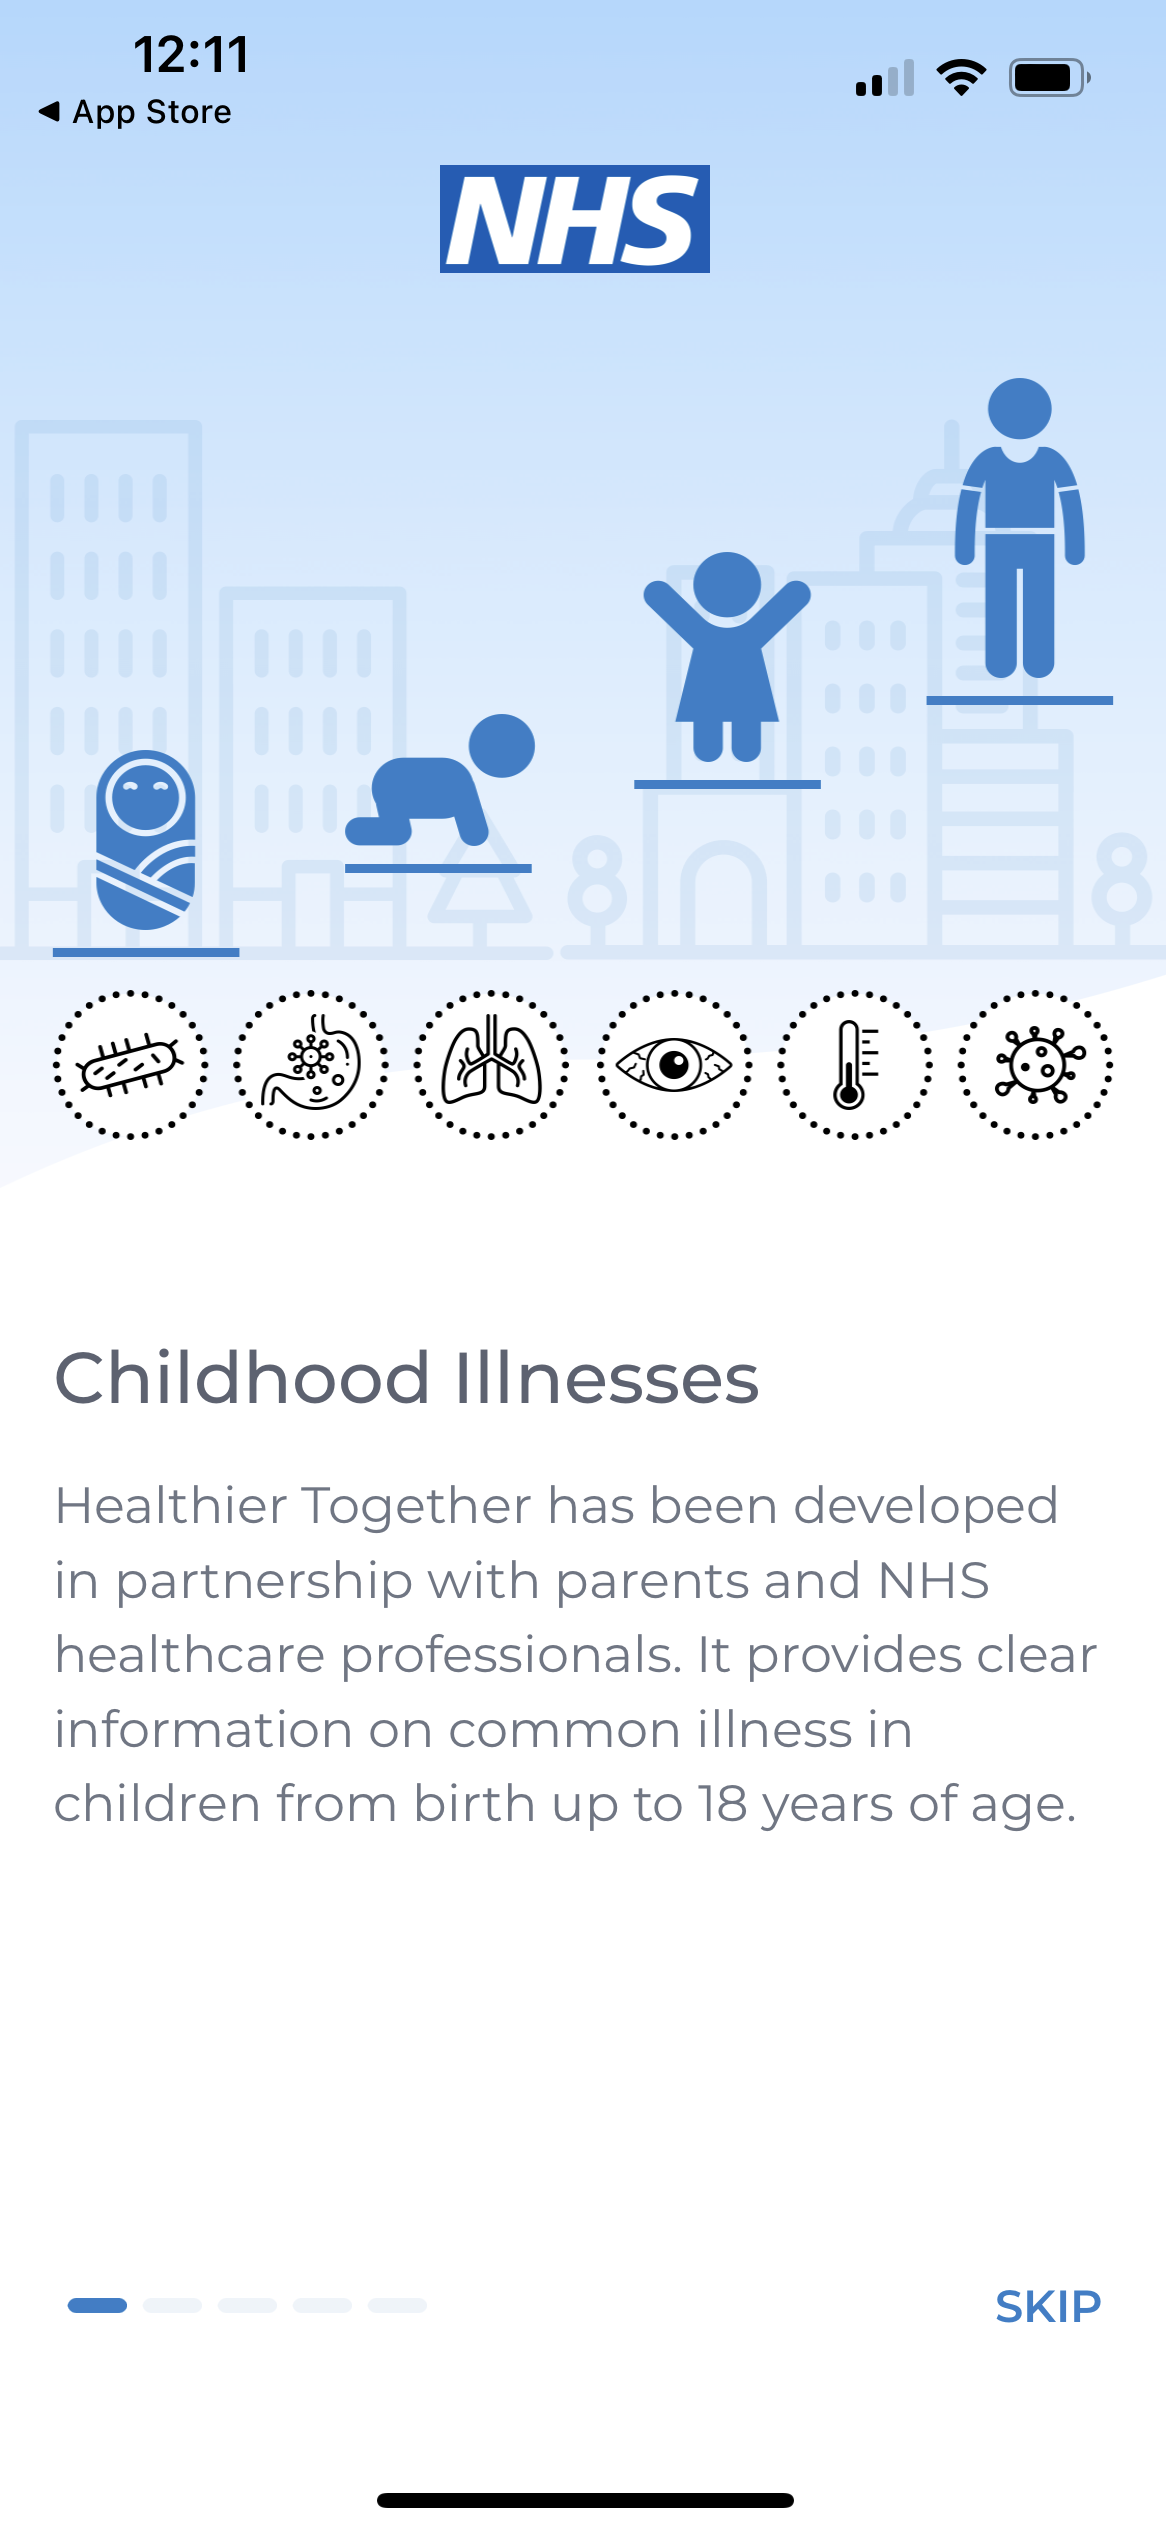 Childhood Illnesses
Healthier Together has been developed in partnership with parents and NHS healthcare professionals. It provides clear information on common illness in children from birth up to 18 years of age.